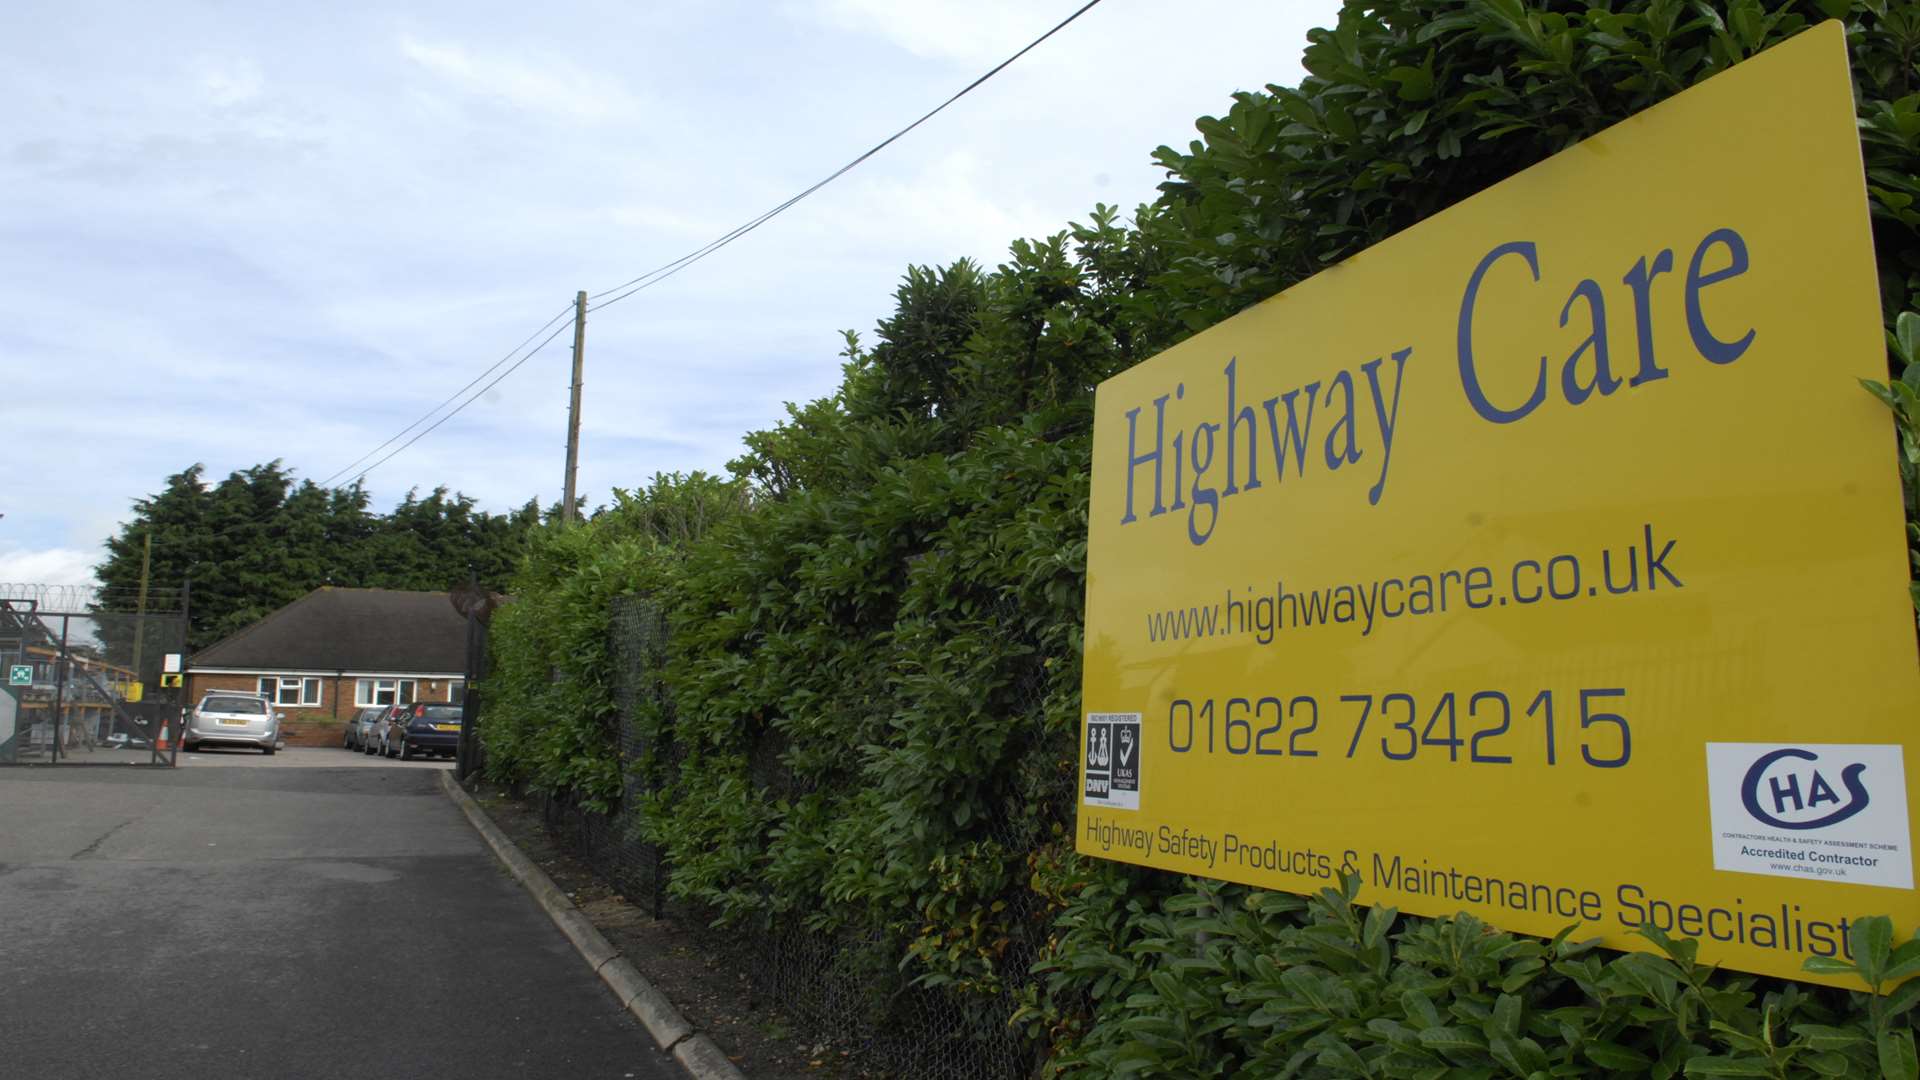 Highway Care Ltd, in Detling Hill, where Andrew Foster was injured